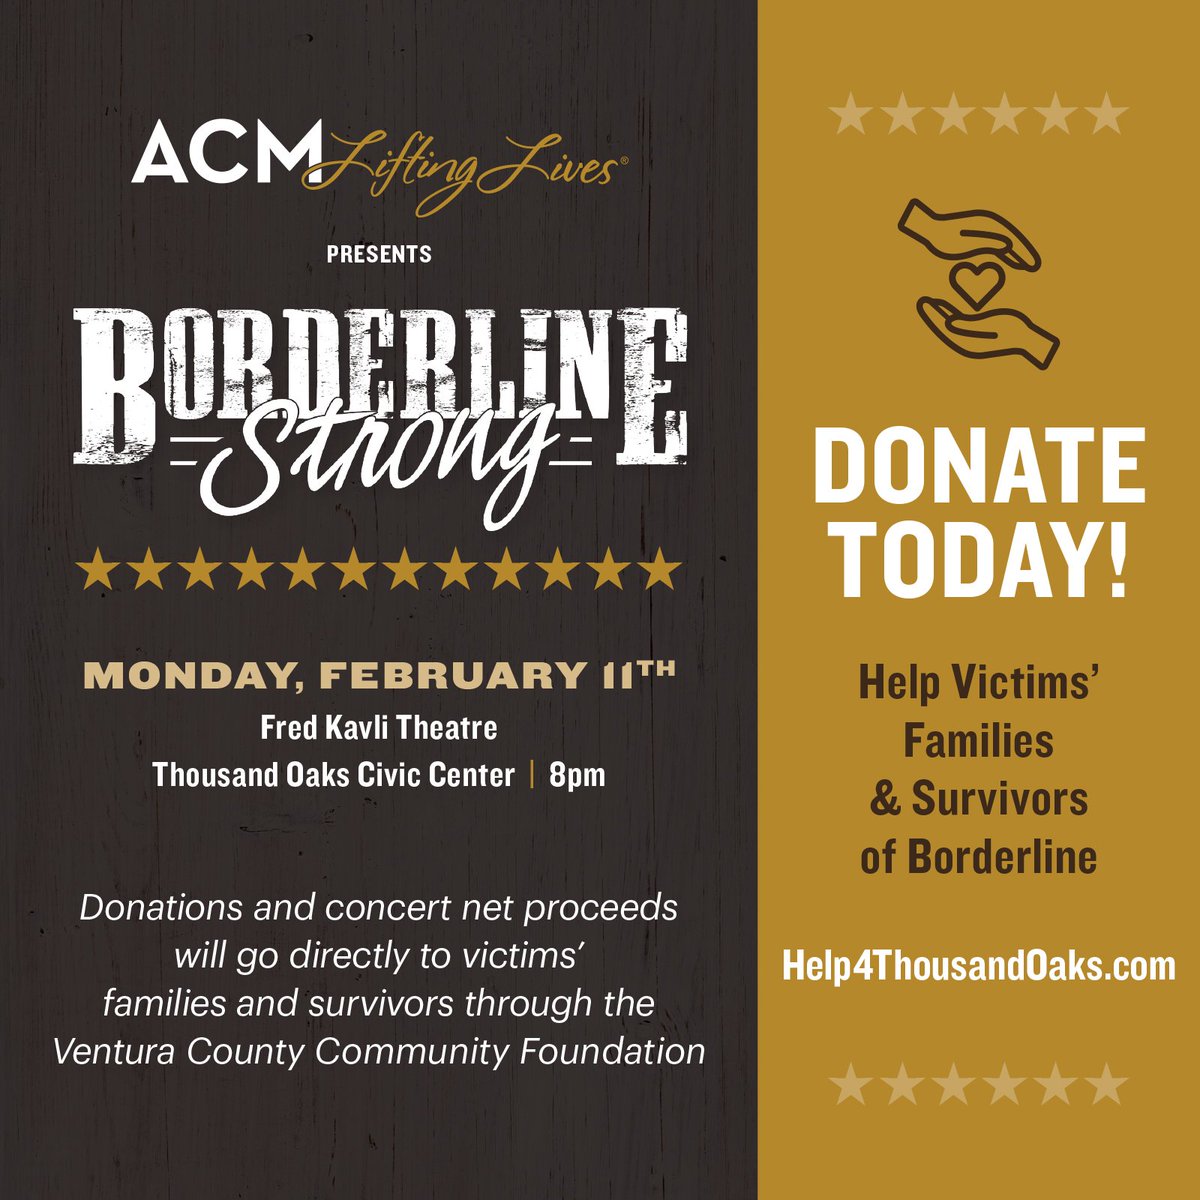 Proud to see the Country family come together for #ACMLiftingLives Presents #BorderlineStrong - for tickets or donation opportunities, visit help4thousandoaks.com. @ACMawards